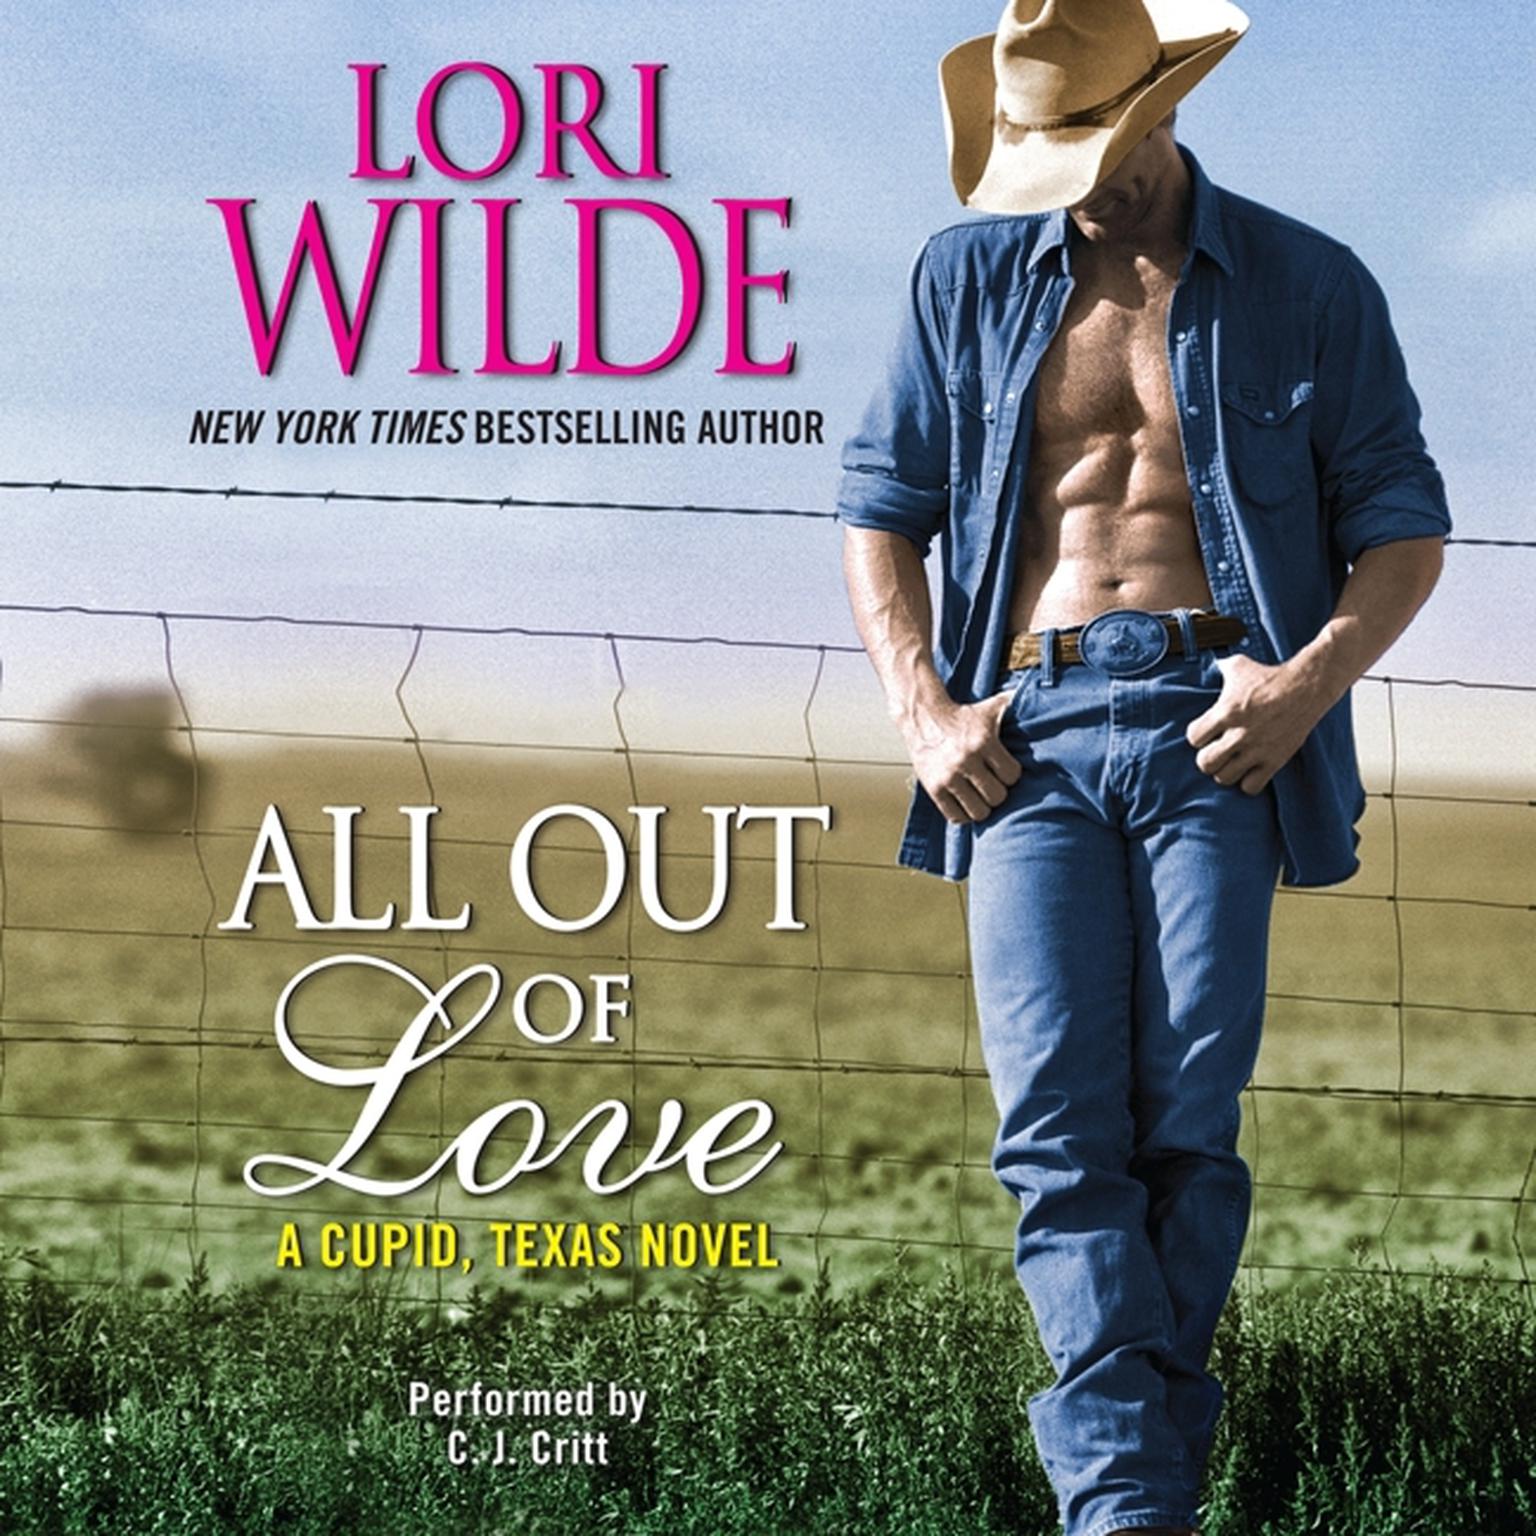 All Out of Love: A Cupid, Texas Novel Audiobook, by Lori Wilde